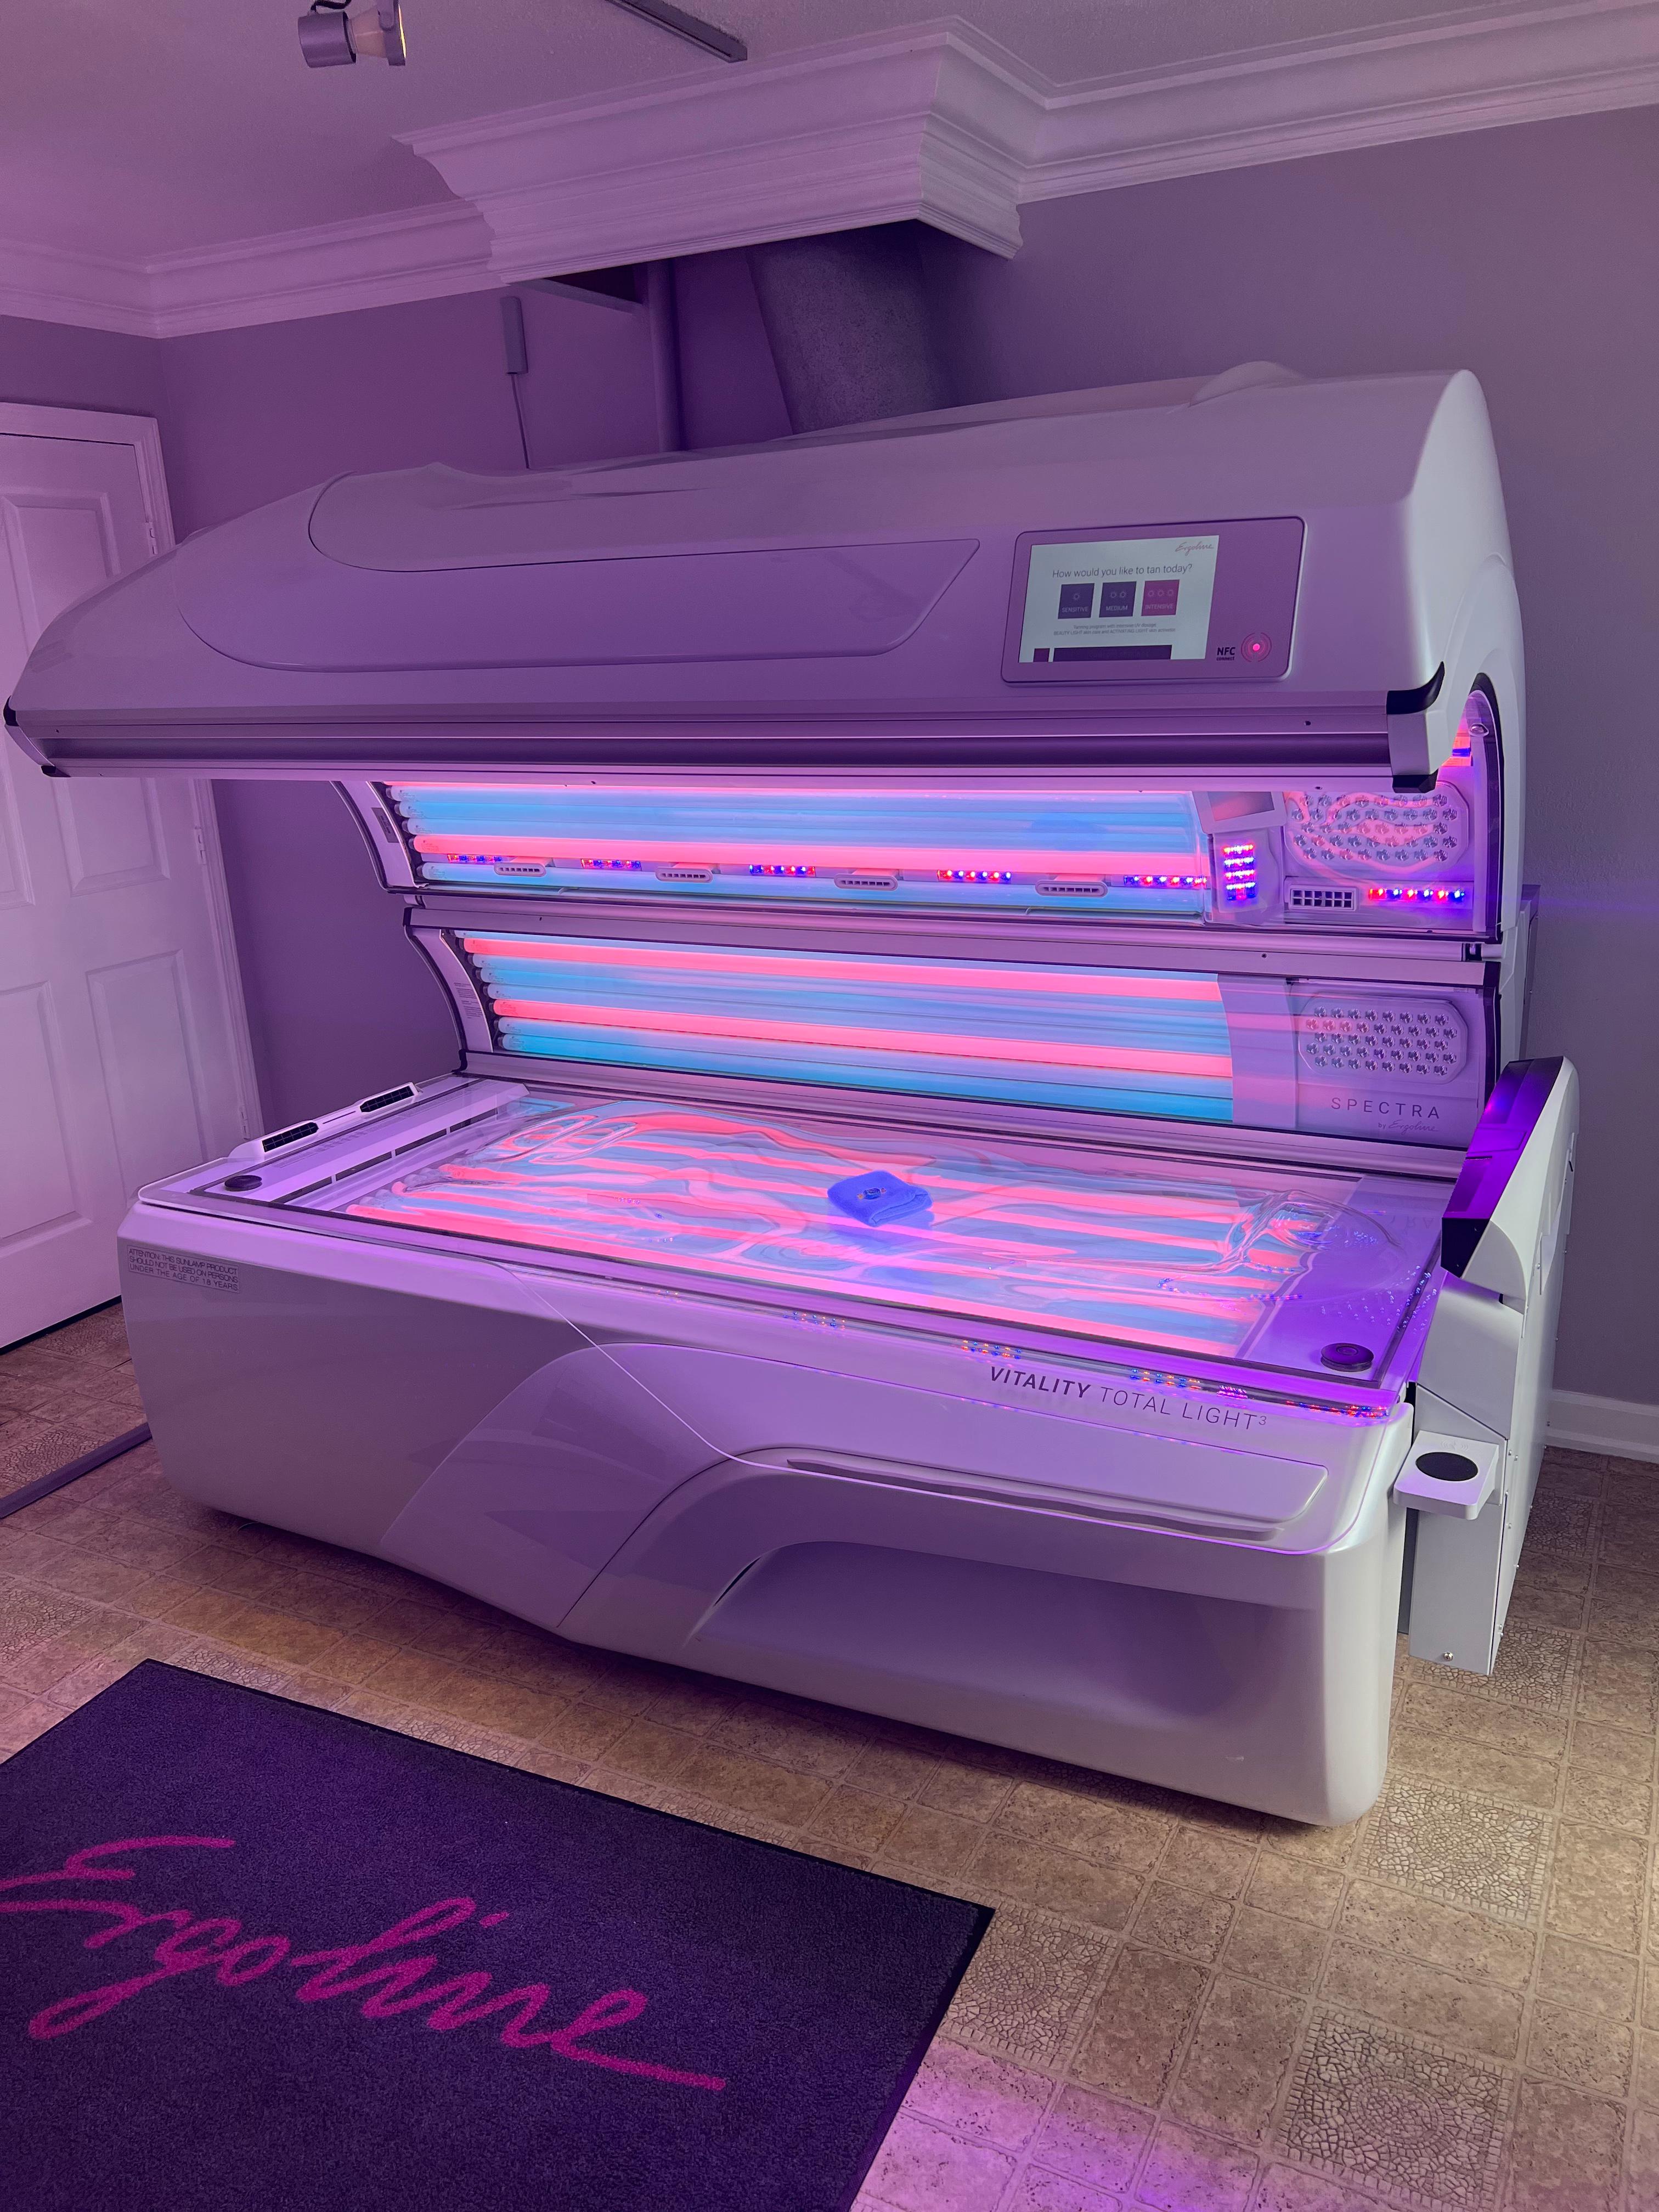 This is our new TLT tanning bed which includes red light therapy in your tanning session.